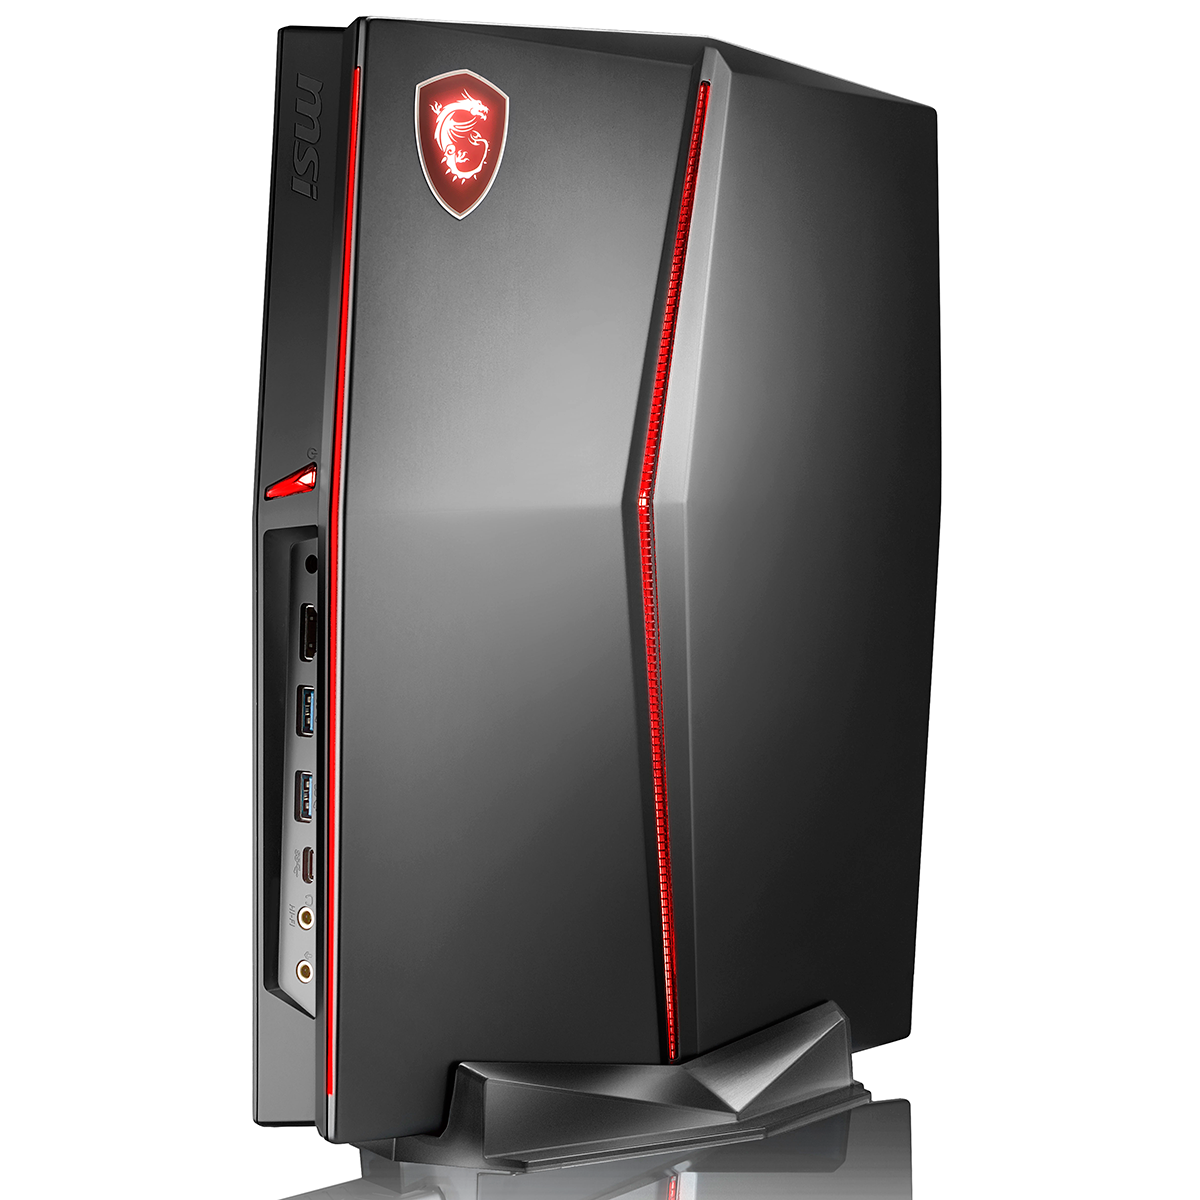 MSI launches small form factor Vortex G25 gaming desktop Systems